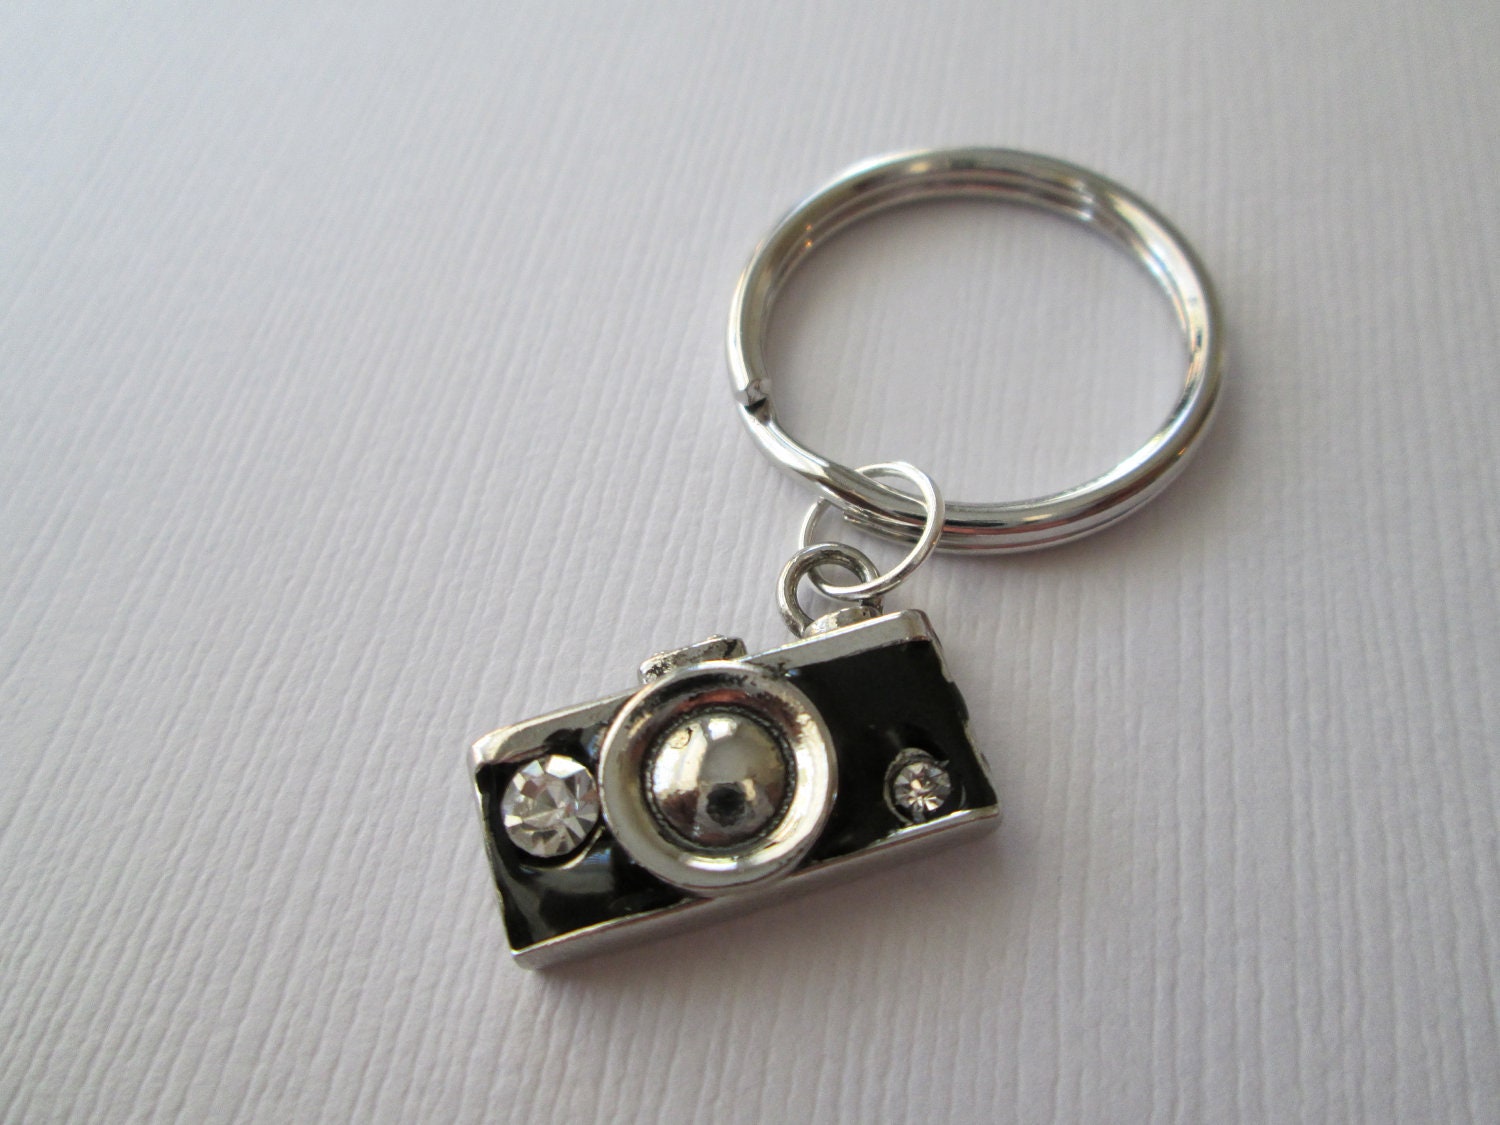 Qianxiaozhen Camera Keychain Wedding Favors And Gifts